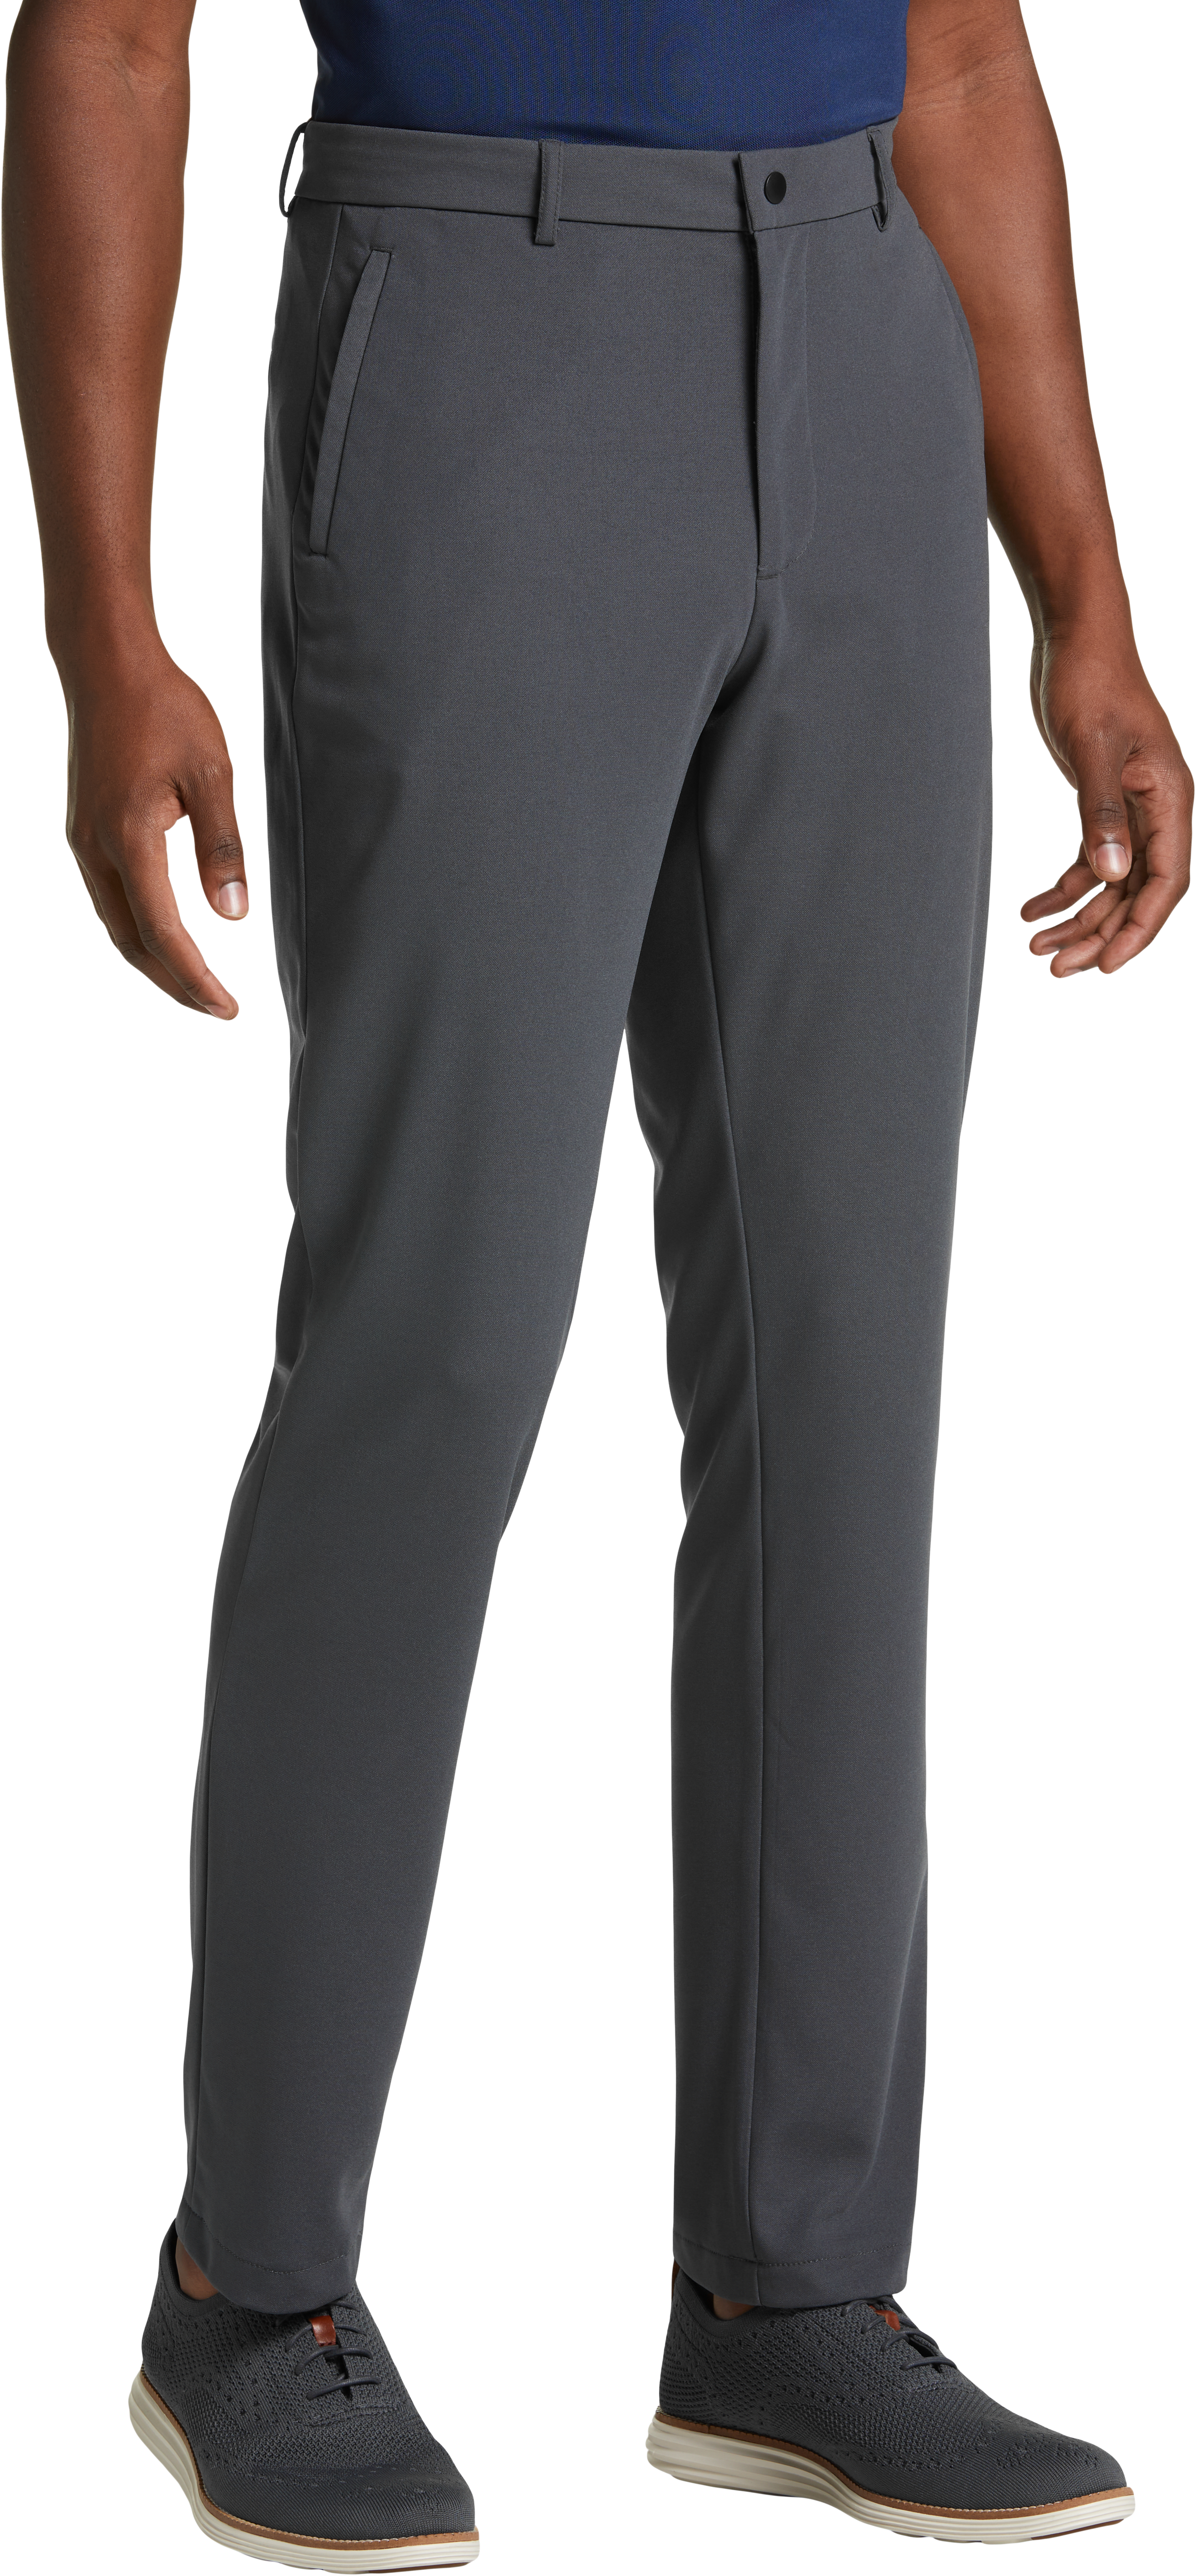 Michael Strahan Modern Fit Activewear Pants for $9.99